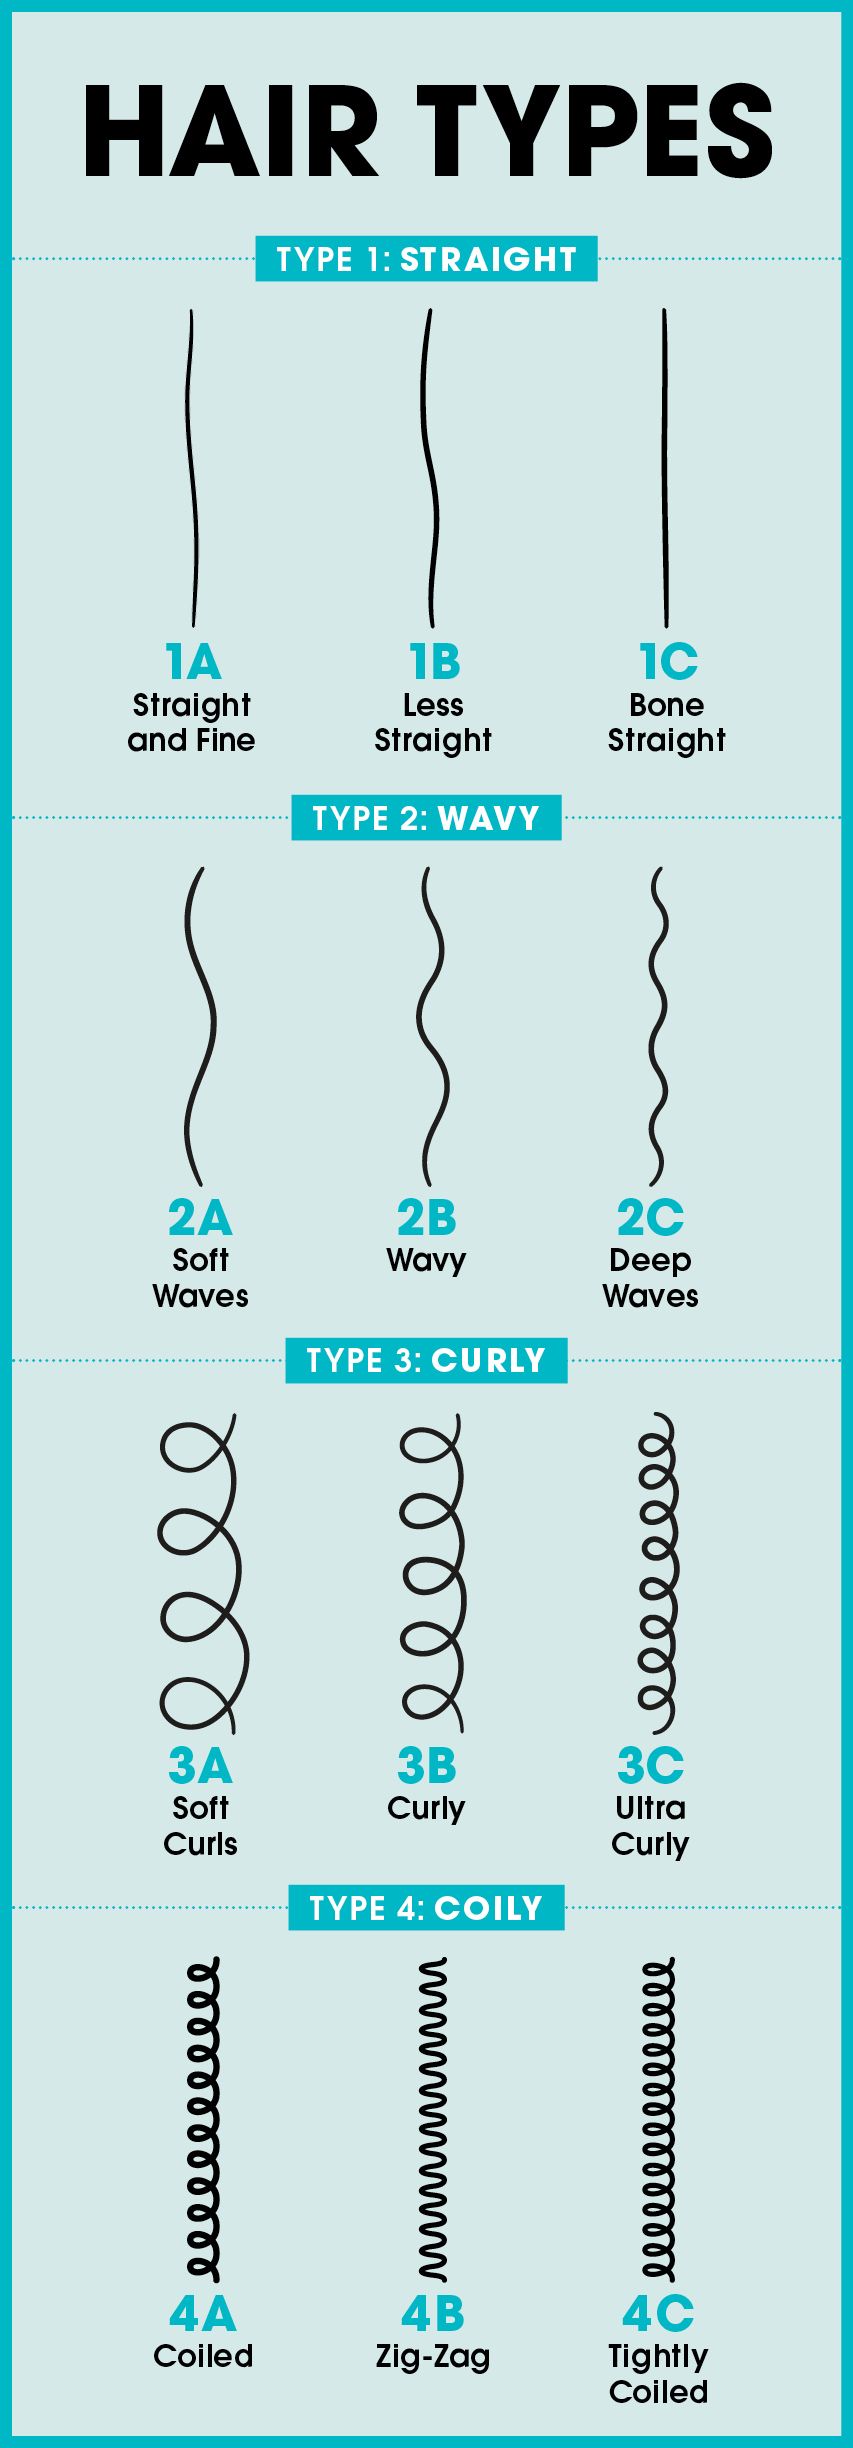 How to Identify Hair Types and Care for Each